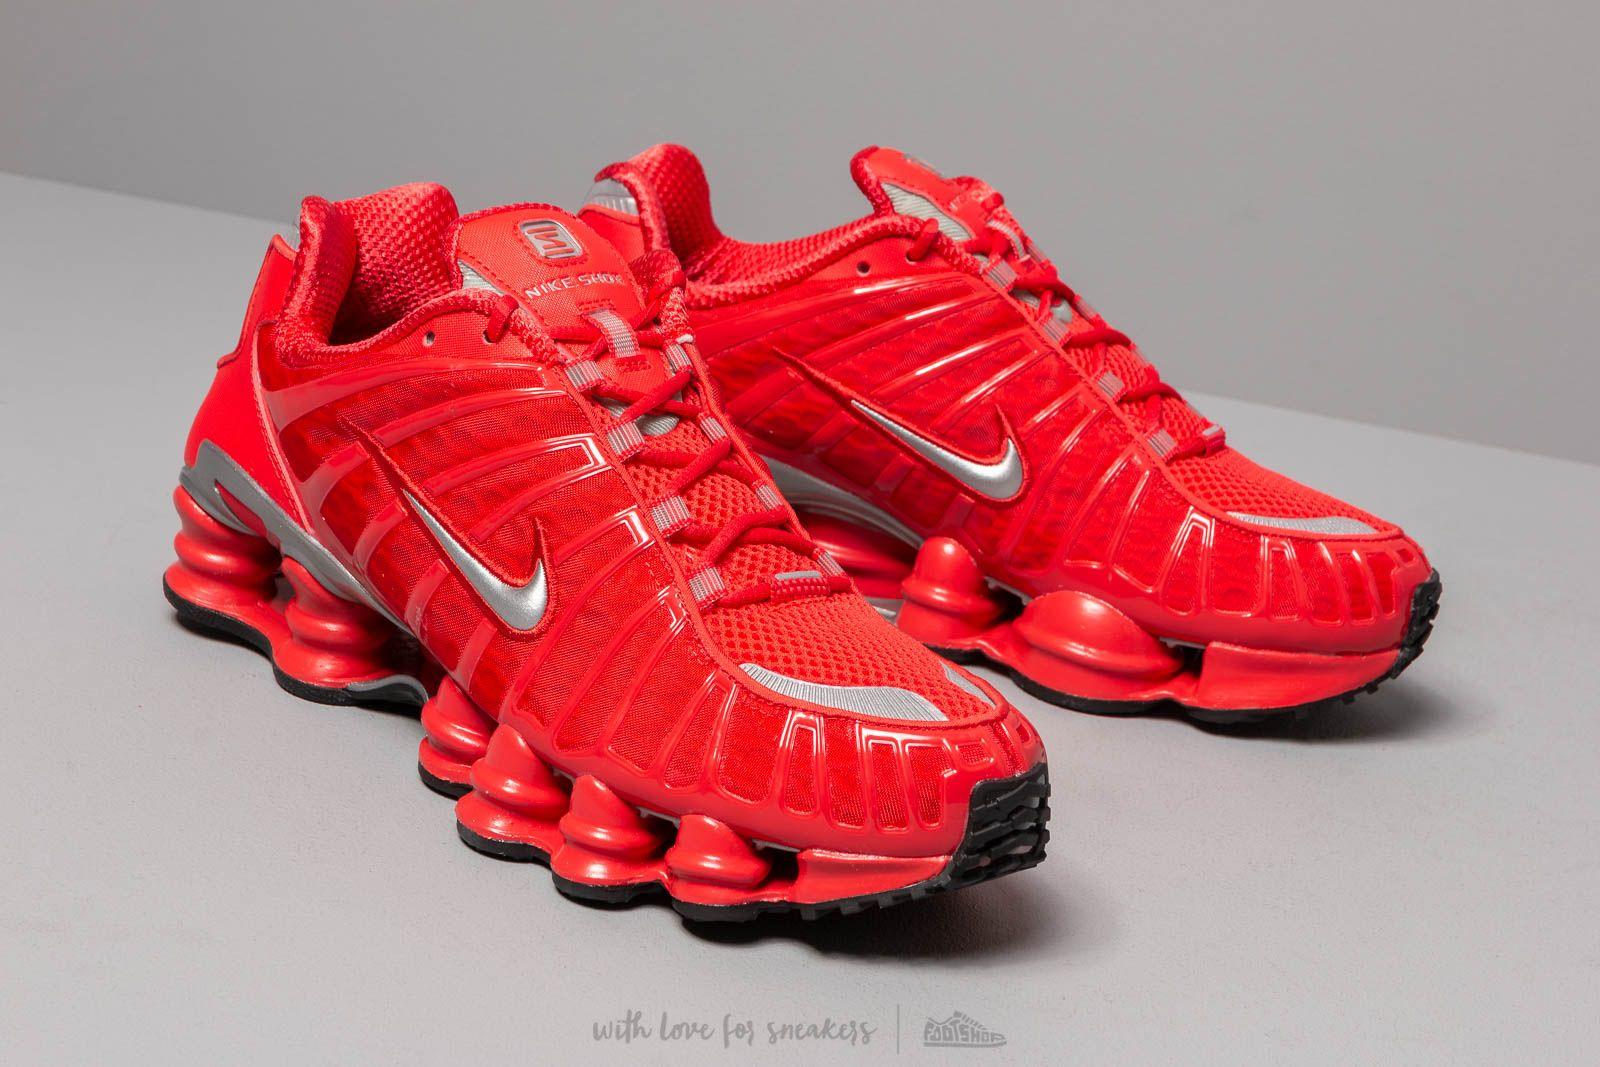 Lyst - Nike Shox Tl Speed Red/ Metallic Silver in Red for Men